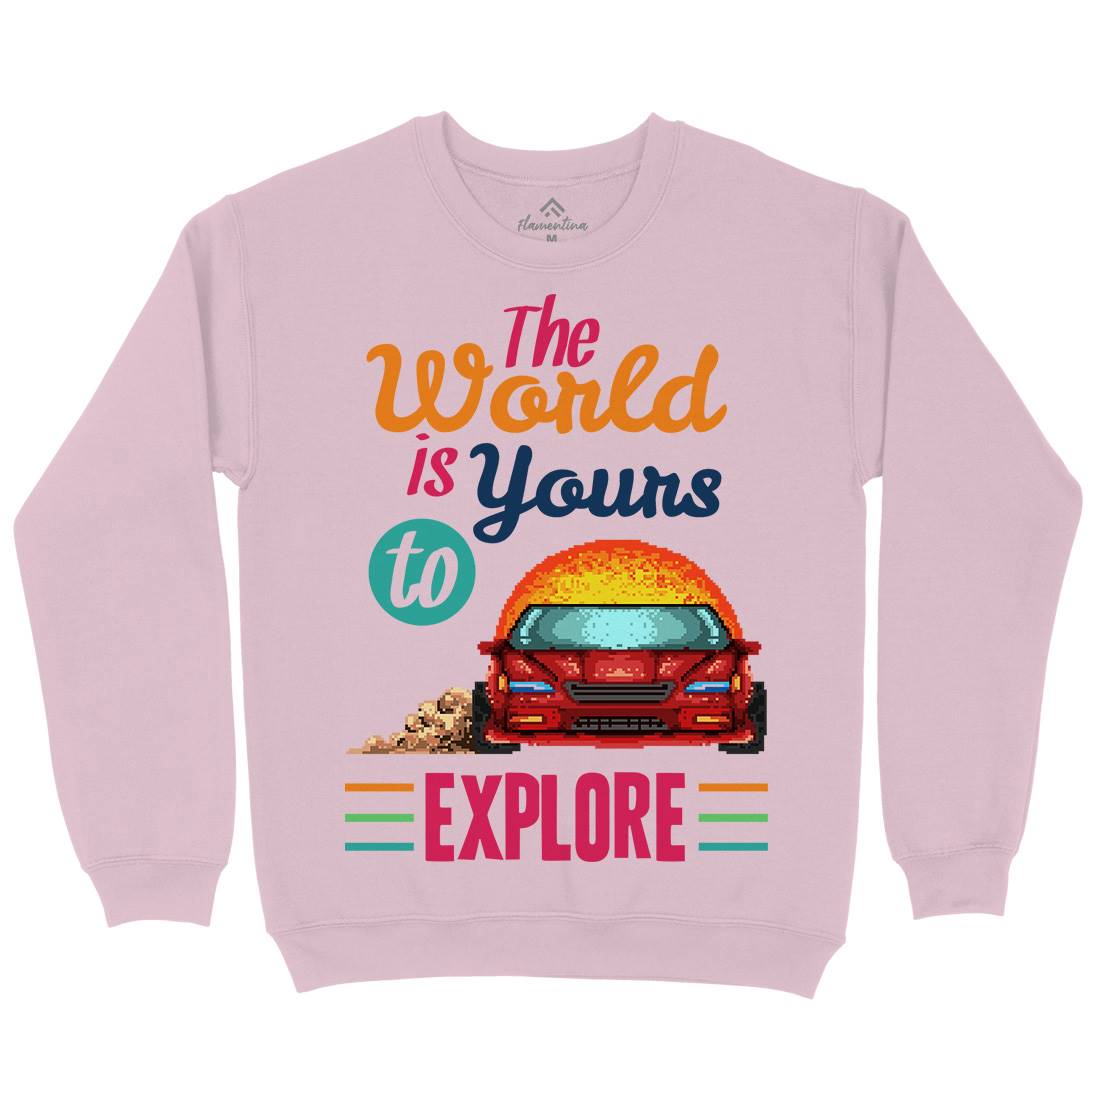 The World Is Yours To Explore Kids Crew Neck Sweatshirt Cars B970